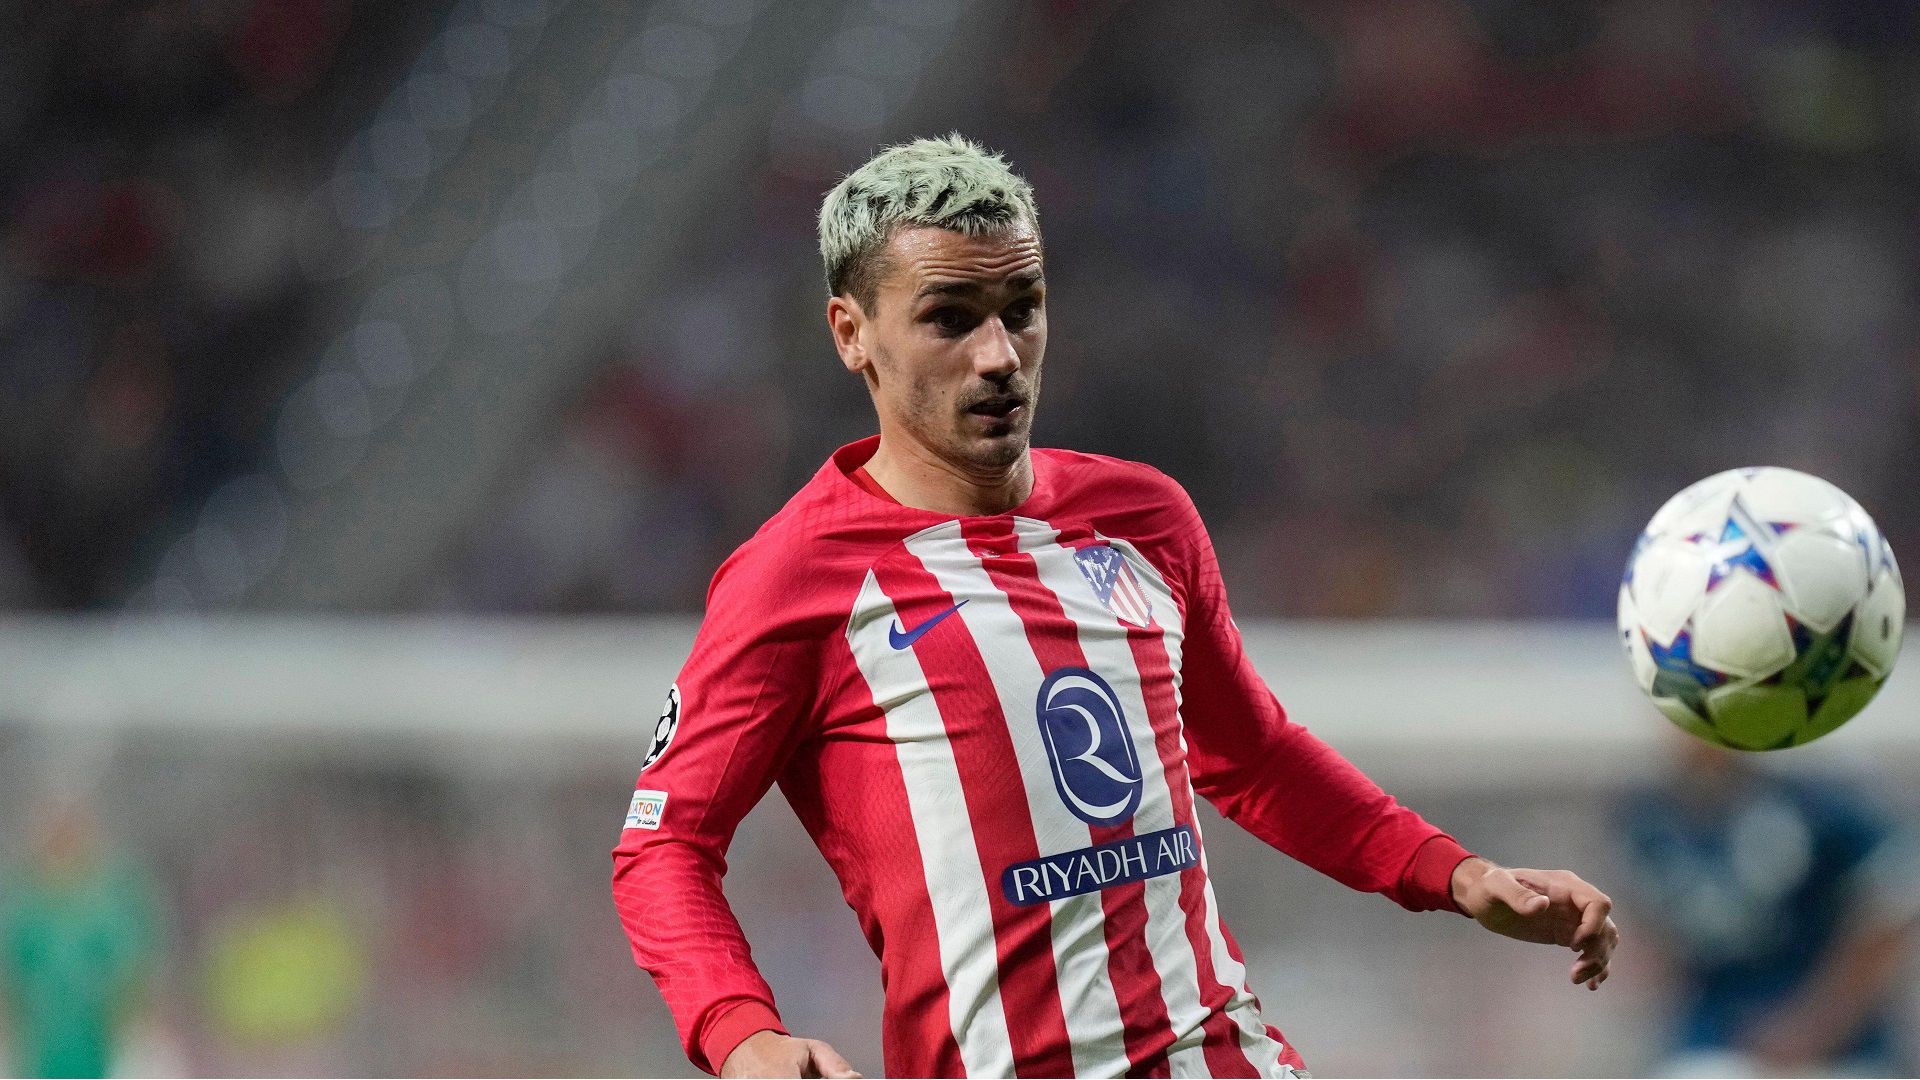 WATCH: Chaotic opening stages see Atletico Madrid lead through Antoine  Griezmann and Celtic down to 10 men - Football España